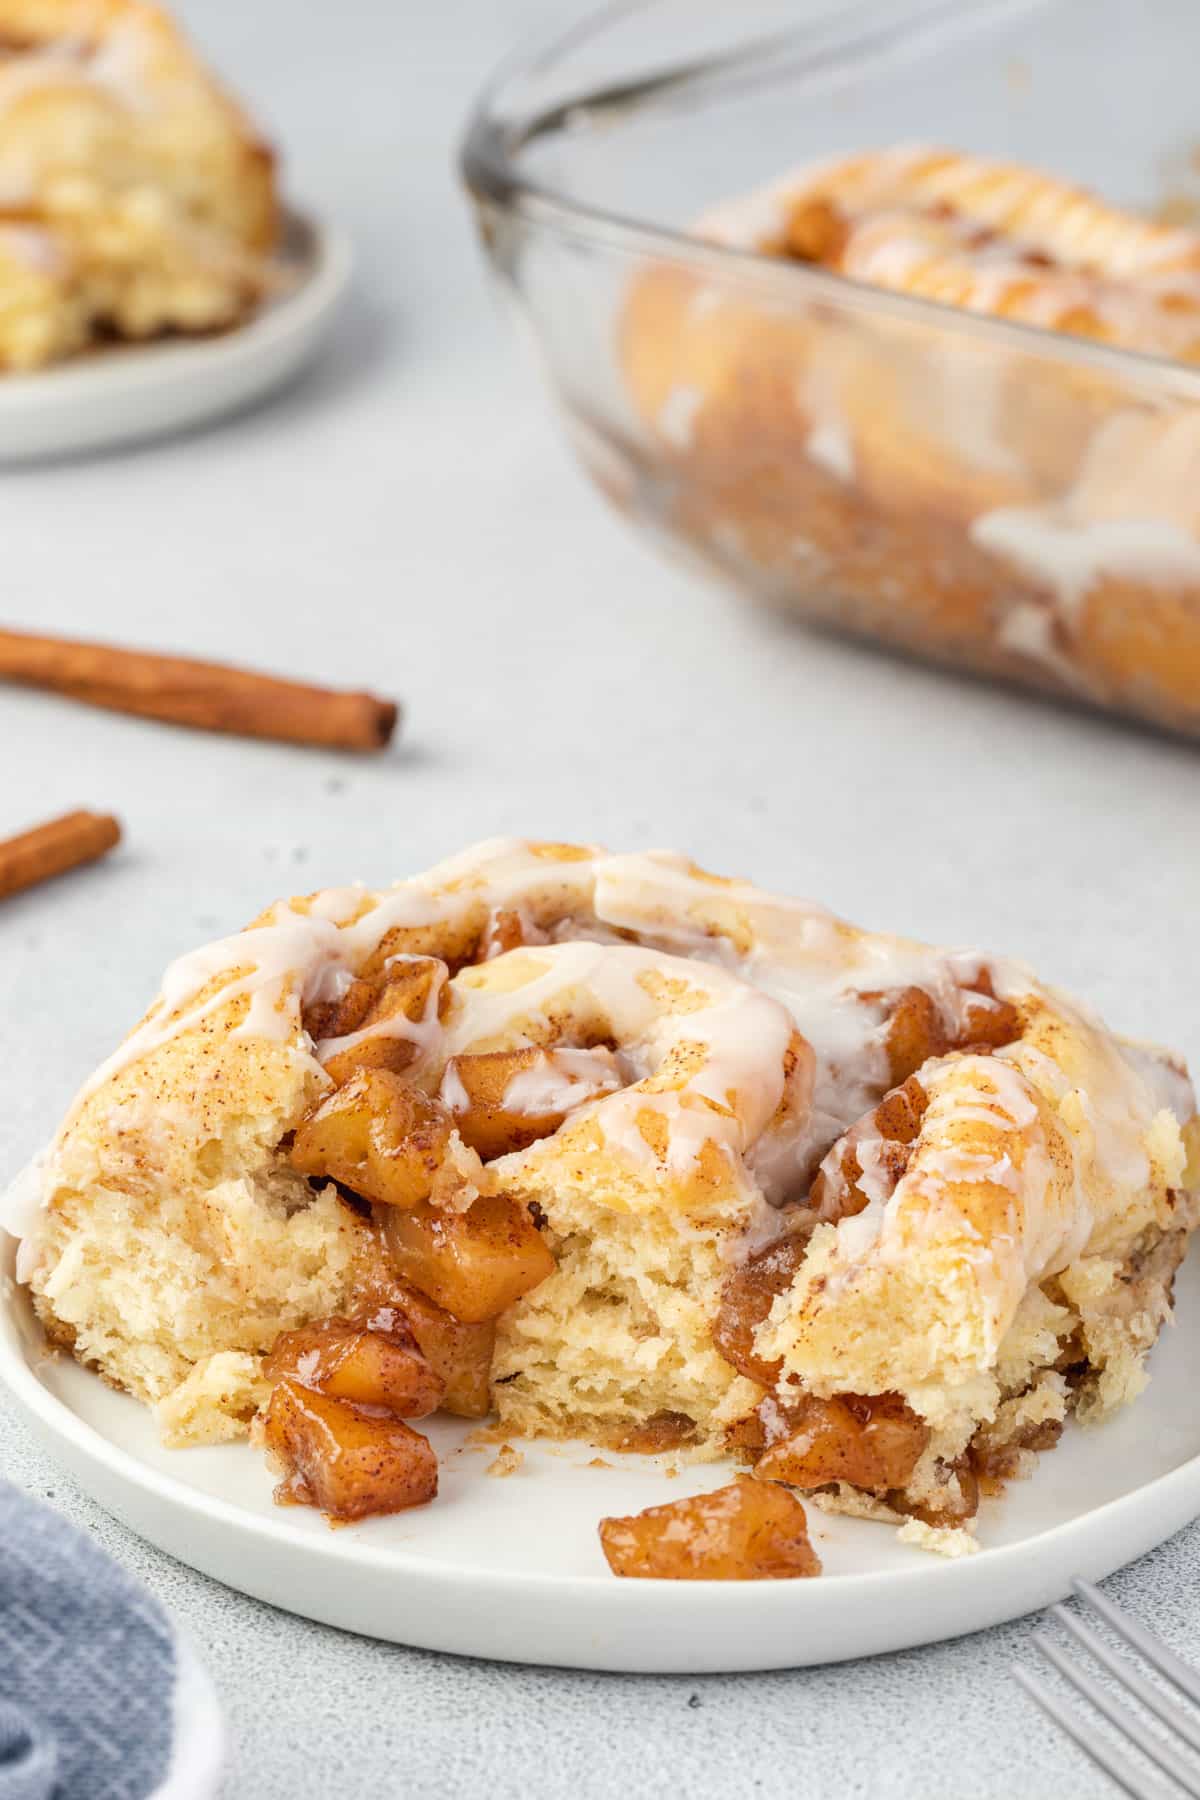 Soft cinnamon roll on a plate with apple pie filling spilling out, and the pan of rolls in background.